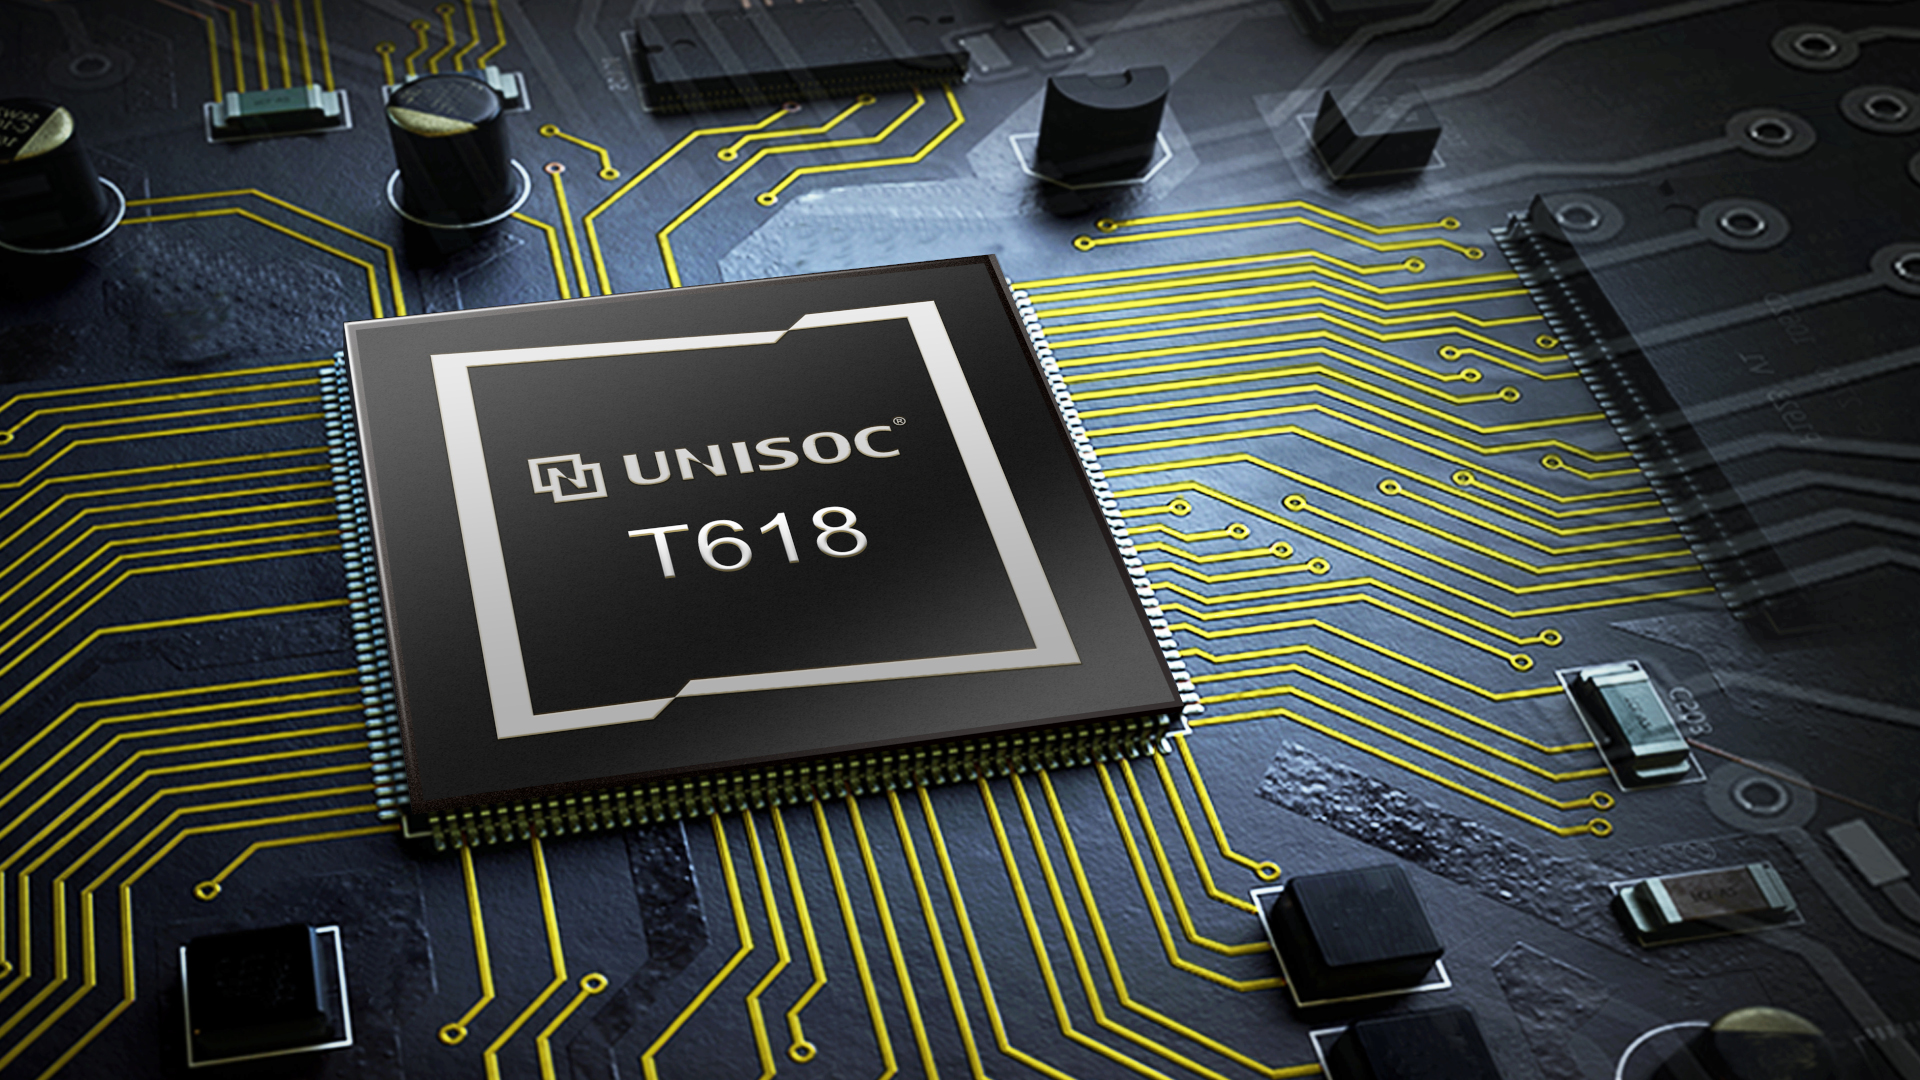 Unisoc processor guide: Here's what you need to know - Android Authority